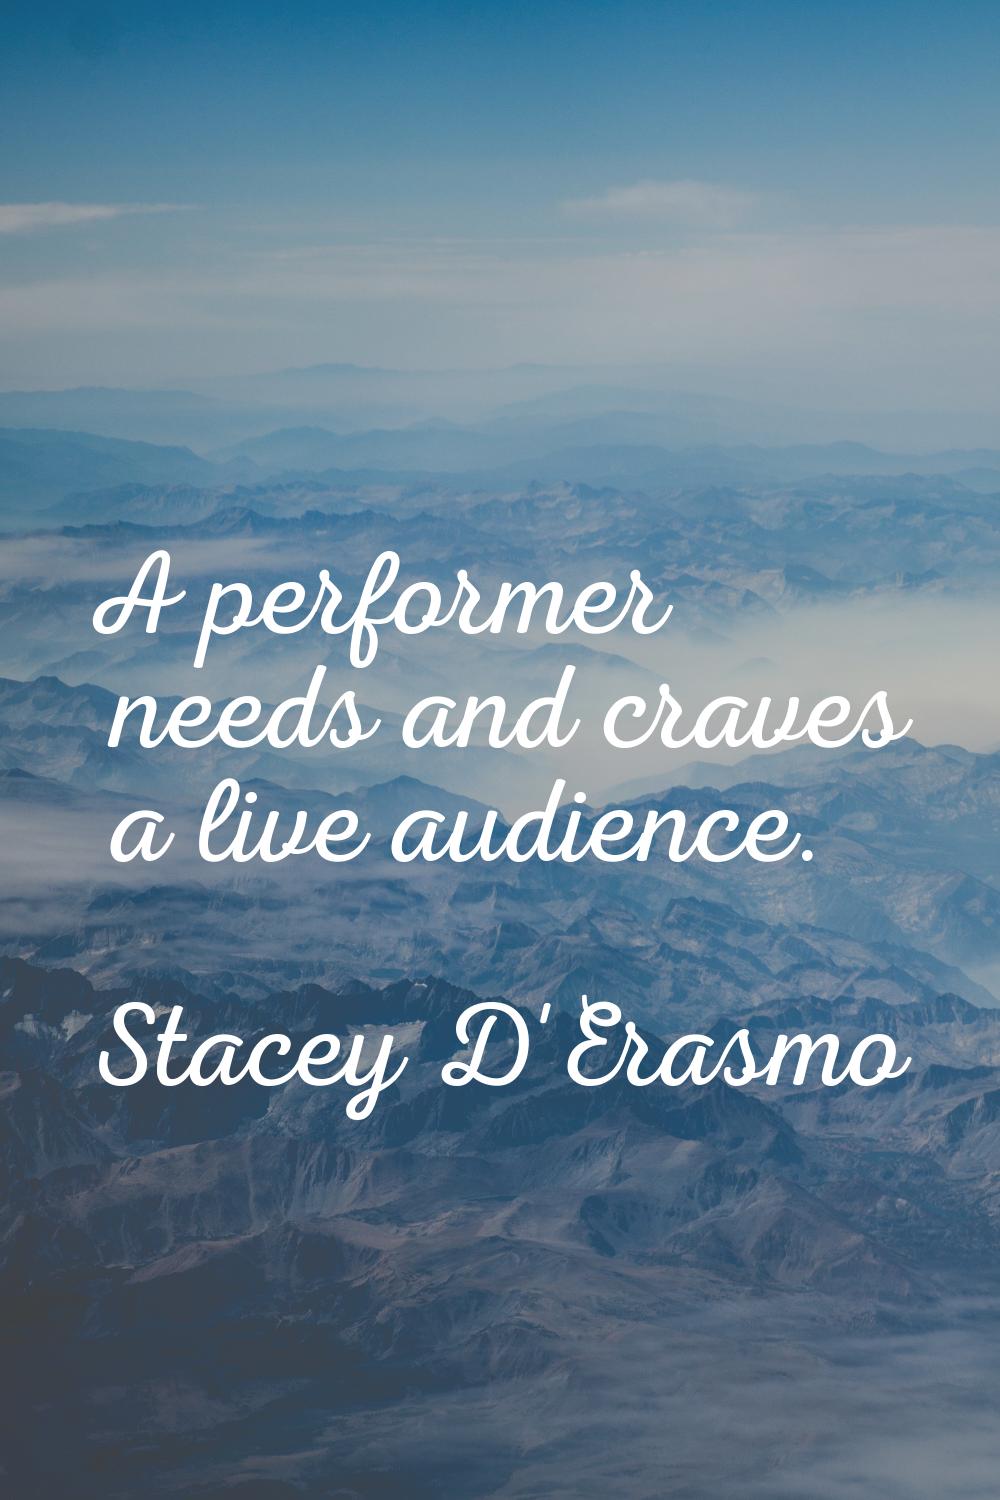 A performer needs and craves a live audience.